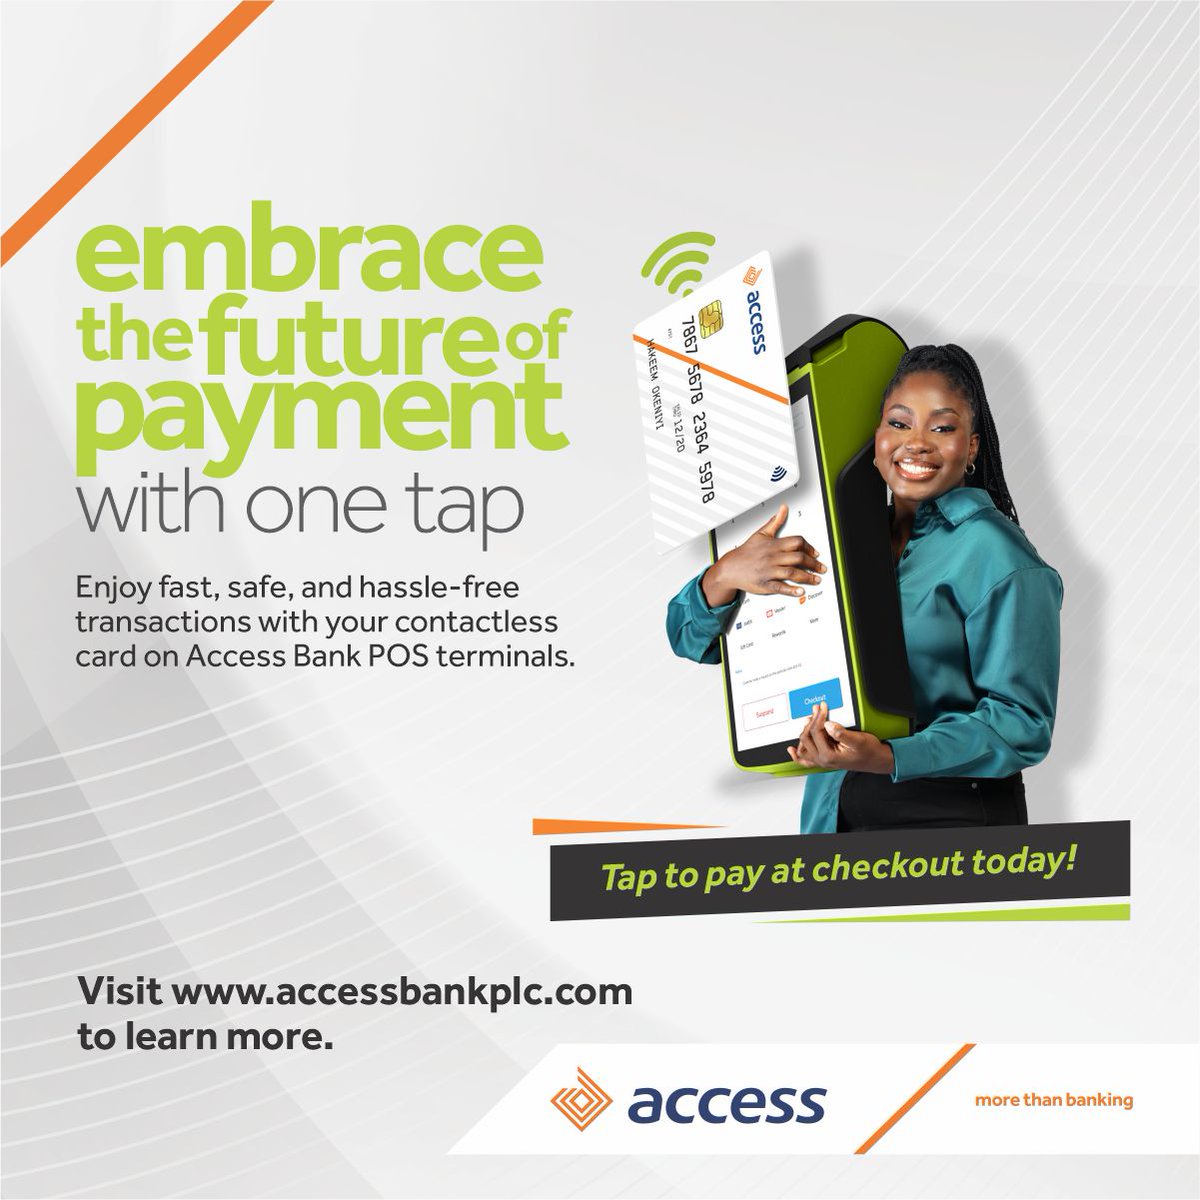 Make payments quickly and easily with our contactless card 💳 Checkout with an Access Bank POS terminal today and experience the convenience! #AccessBank #Contactlesspayment #MoreThanBanking